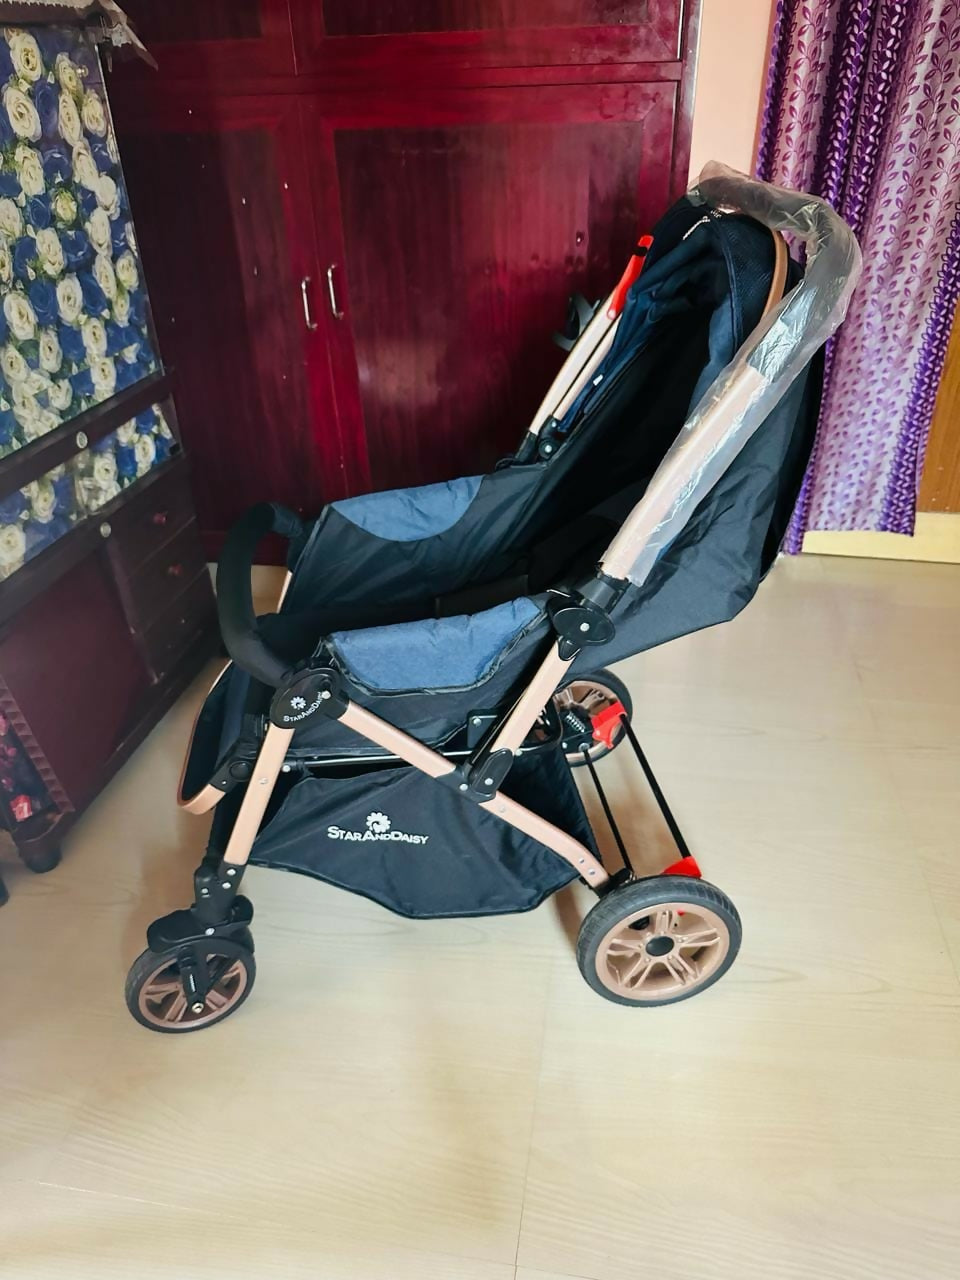 Experience comfort and convenience with the STAR AND DAISY Stroller/Pram for Baby, featuring a spacious seat, adjustable canopy, and one-hand folding mechanism for easy travel and storage.